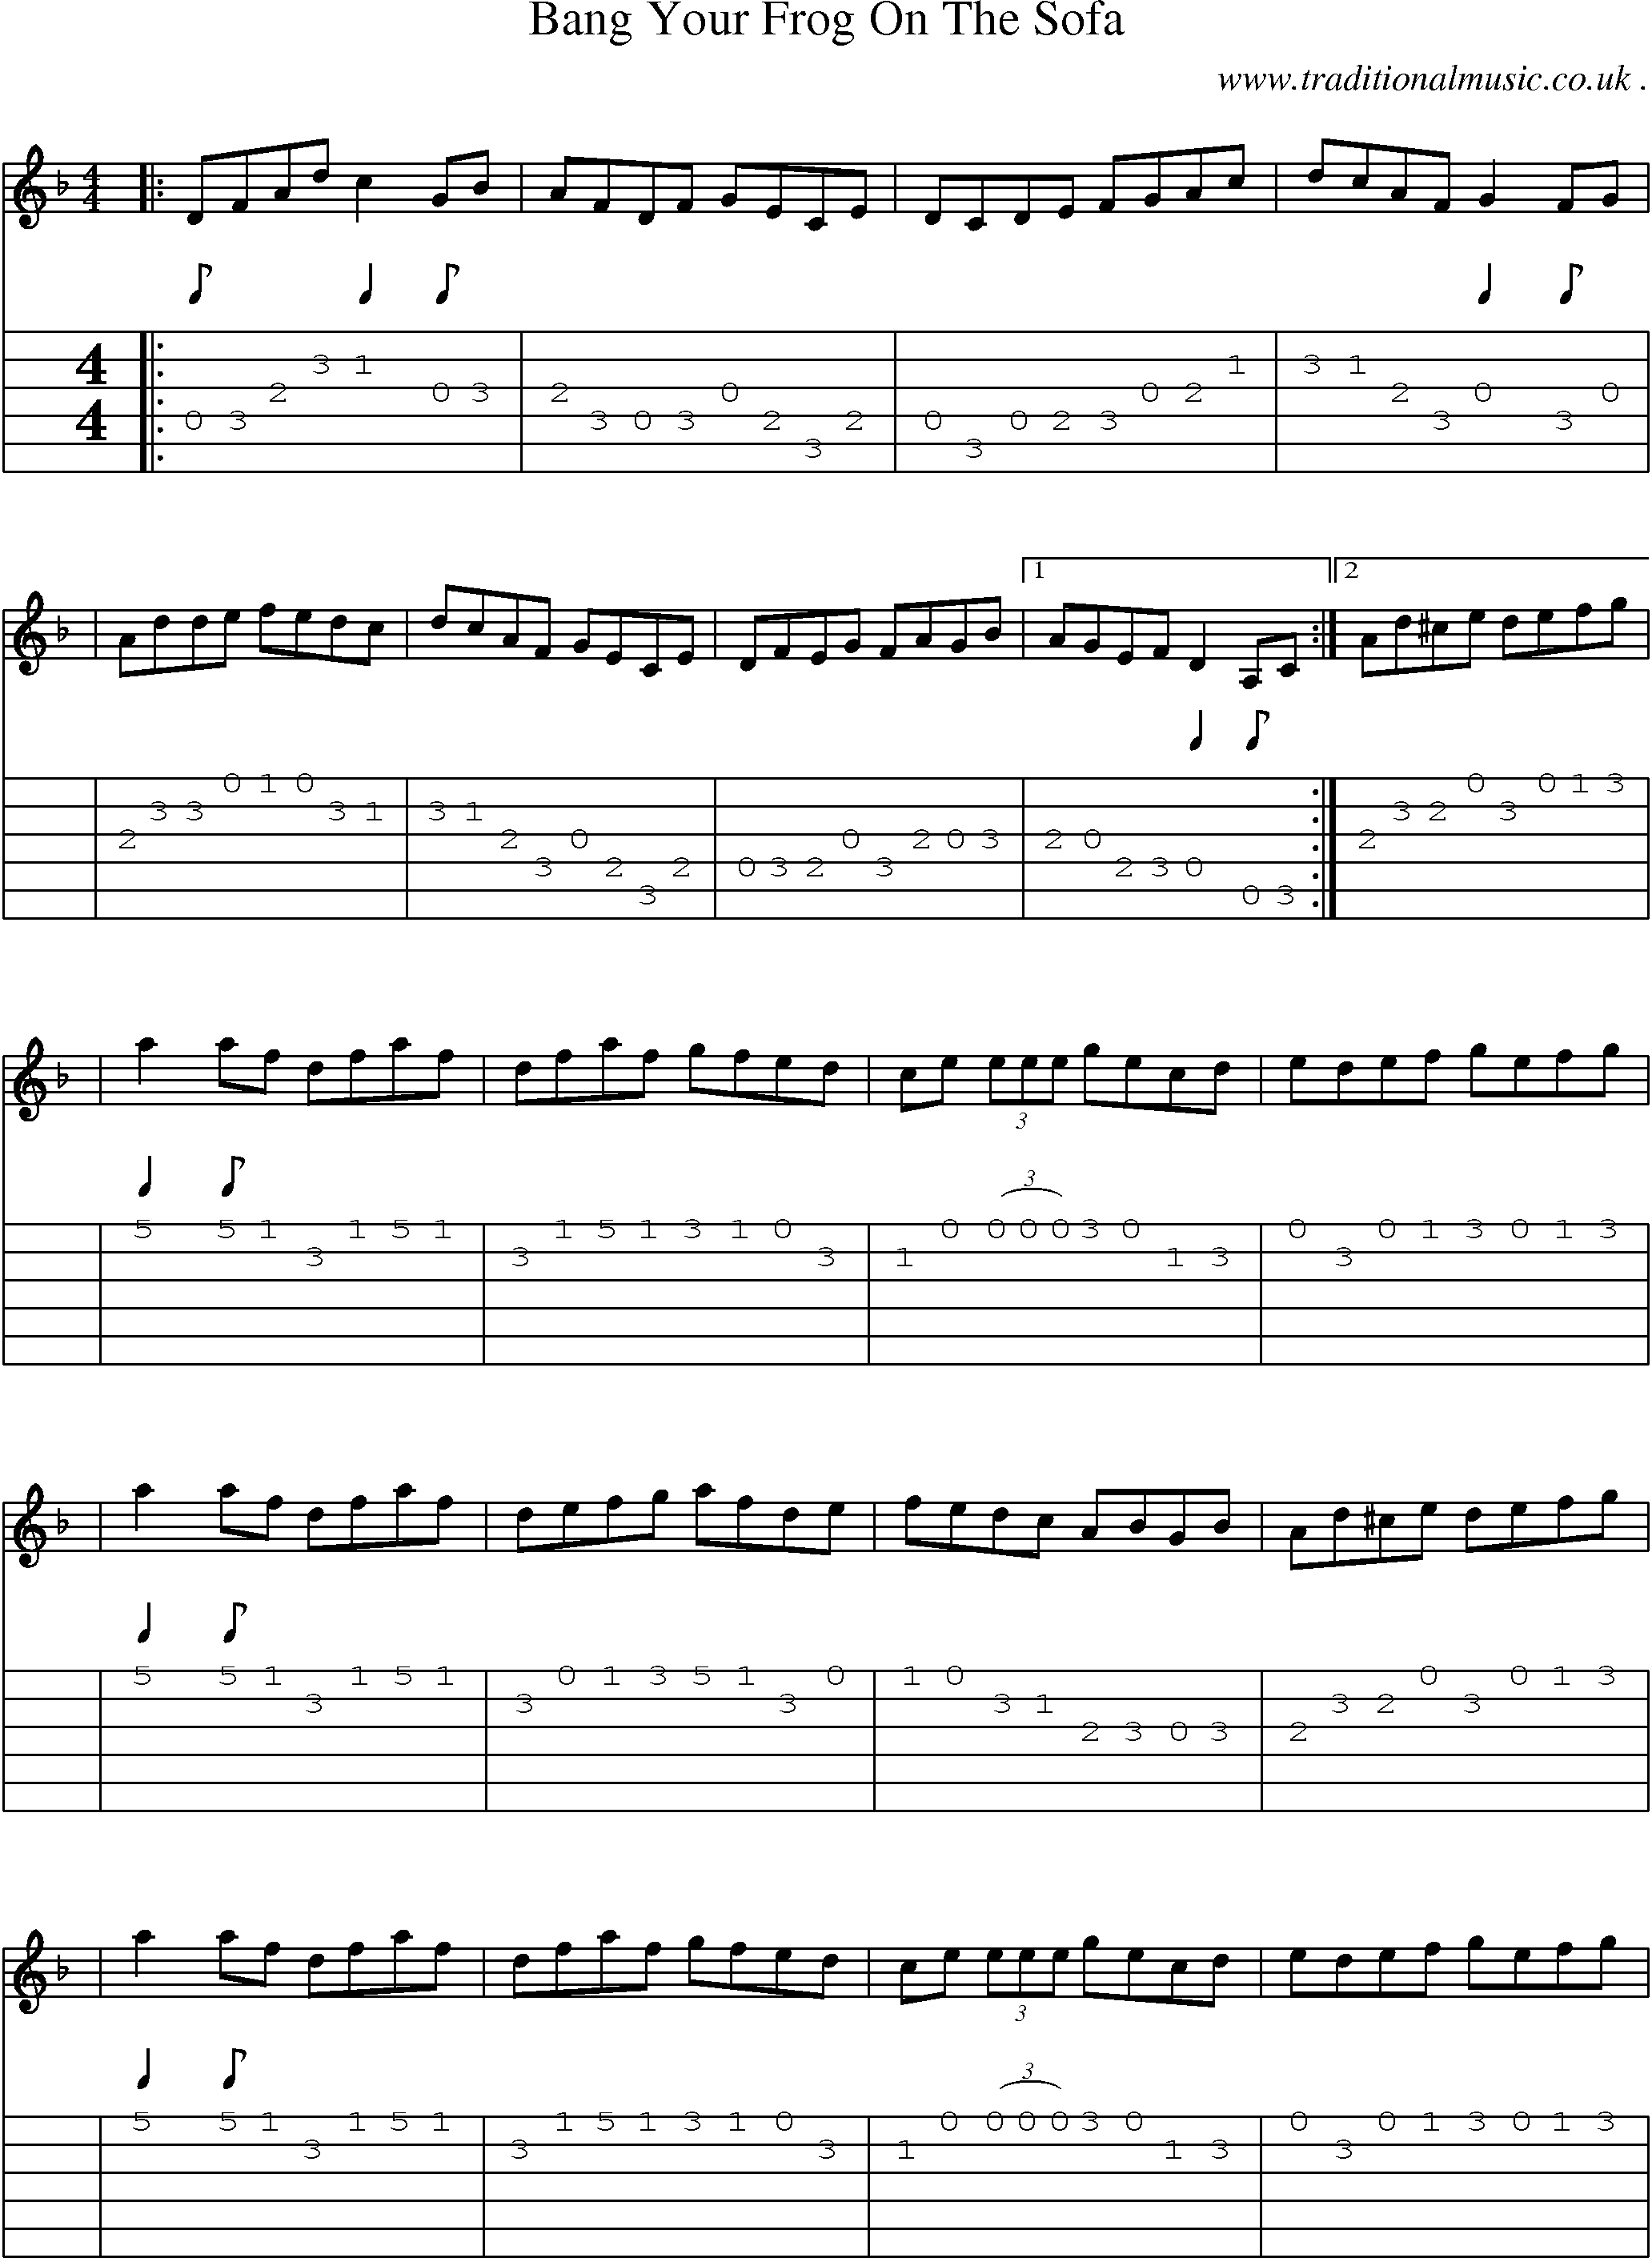 Sheet-Music and Guitar Tabs for Bang Your Frog On The Sofa